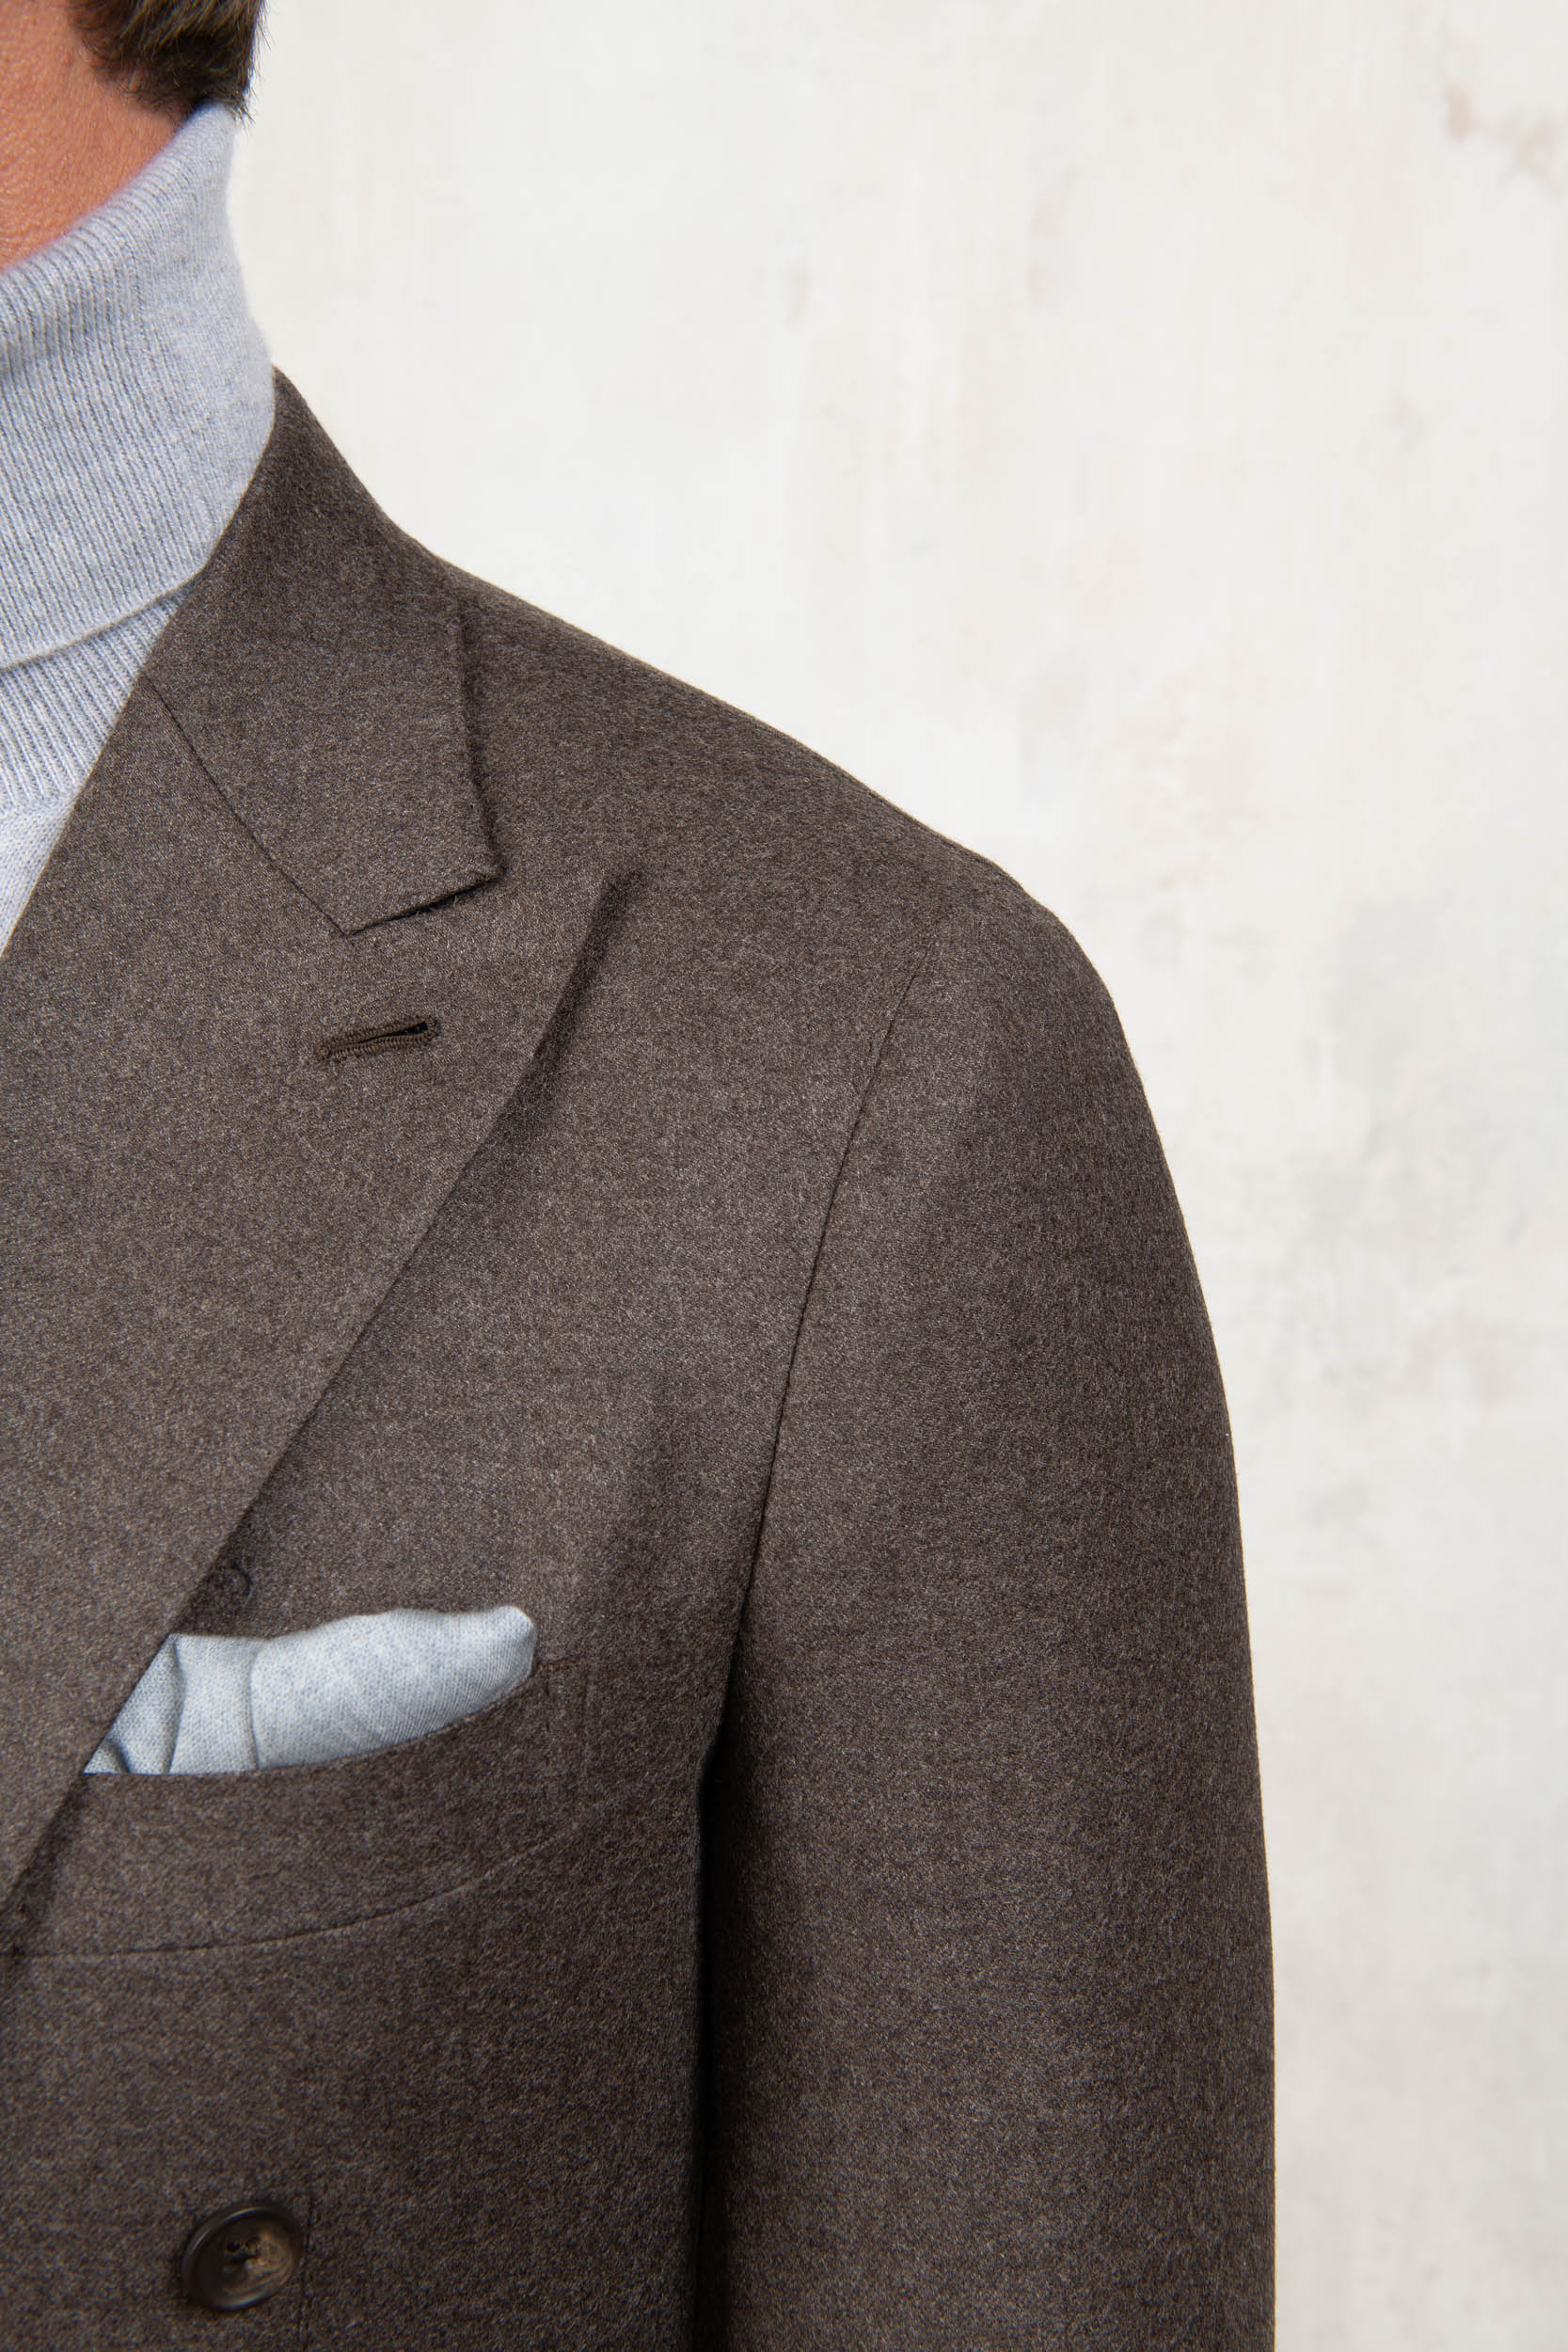 Brown double breasted suit in Loro Piana wool and cashmere - Made in Italy